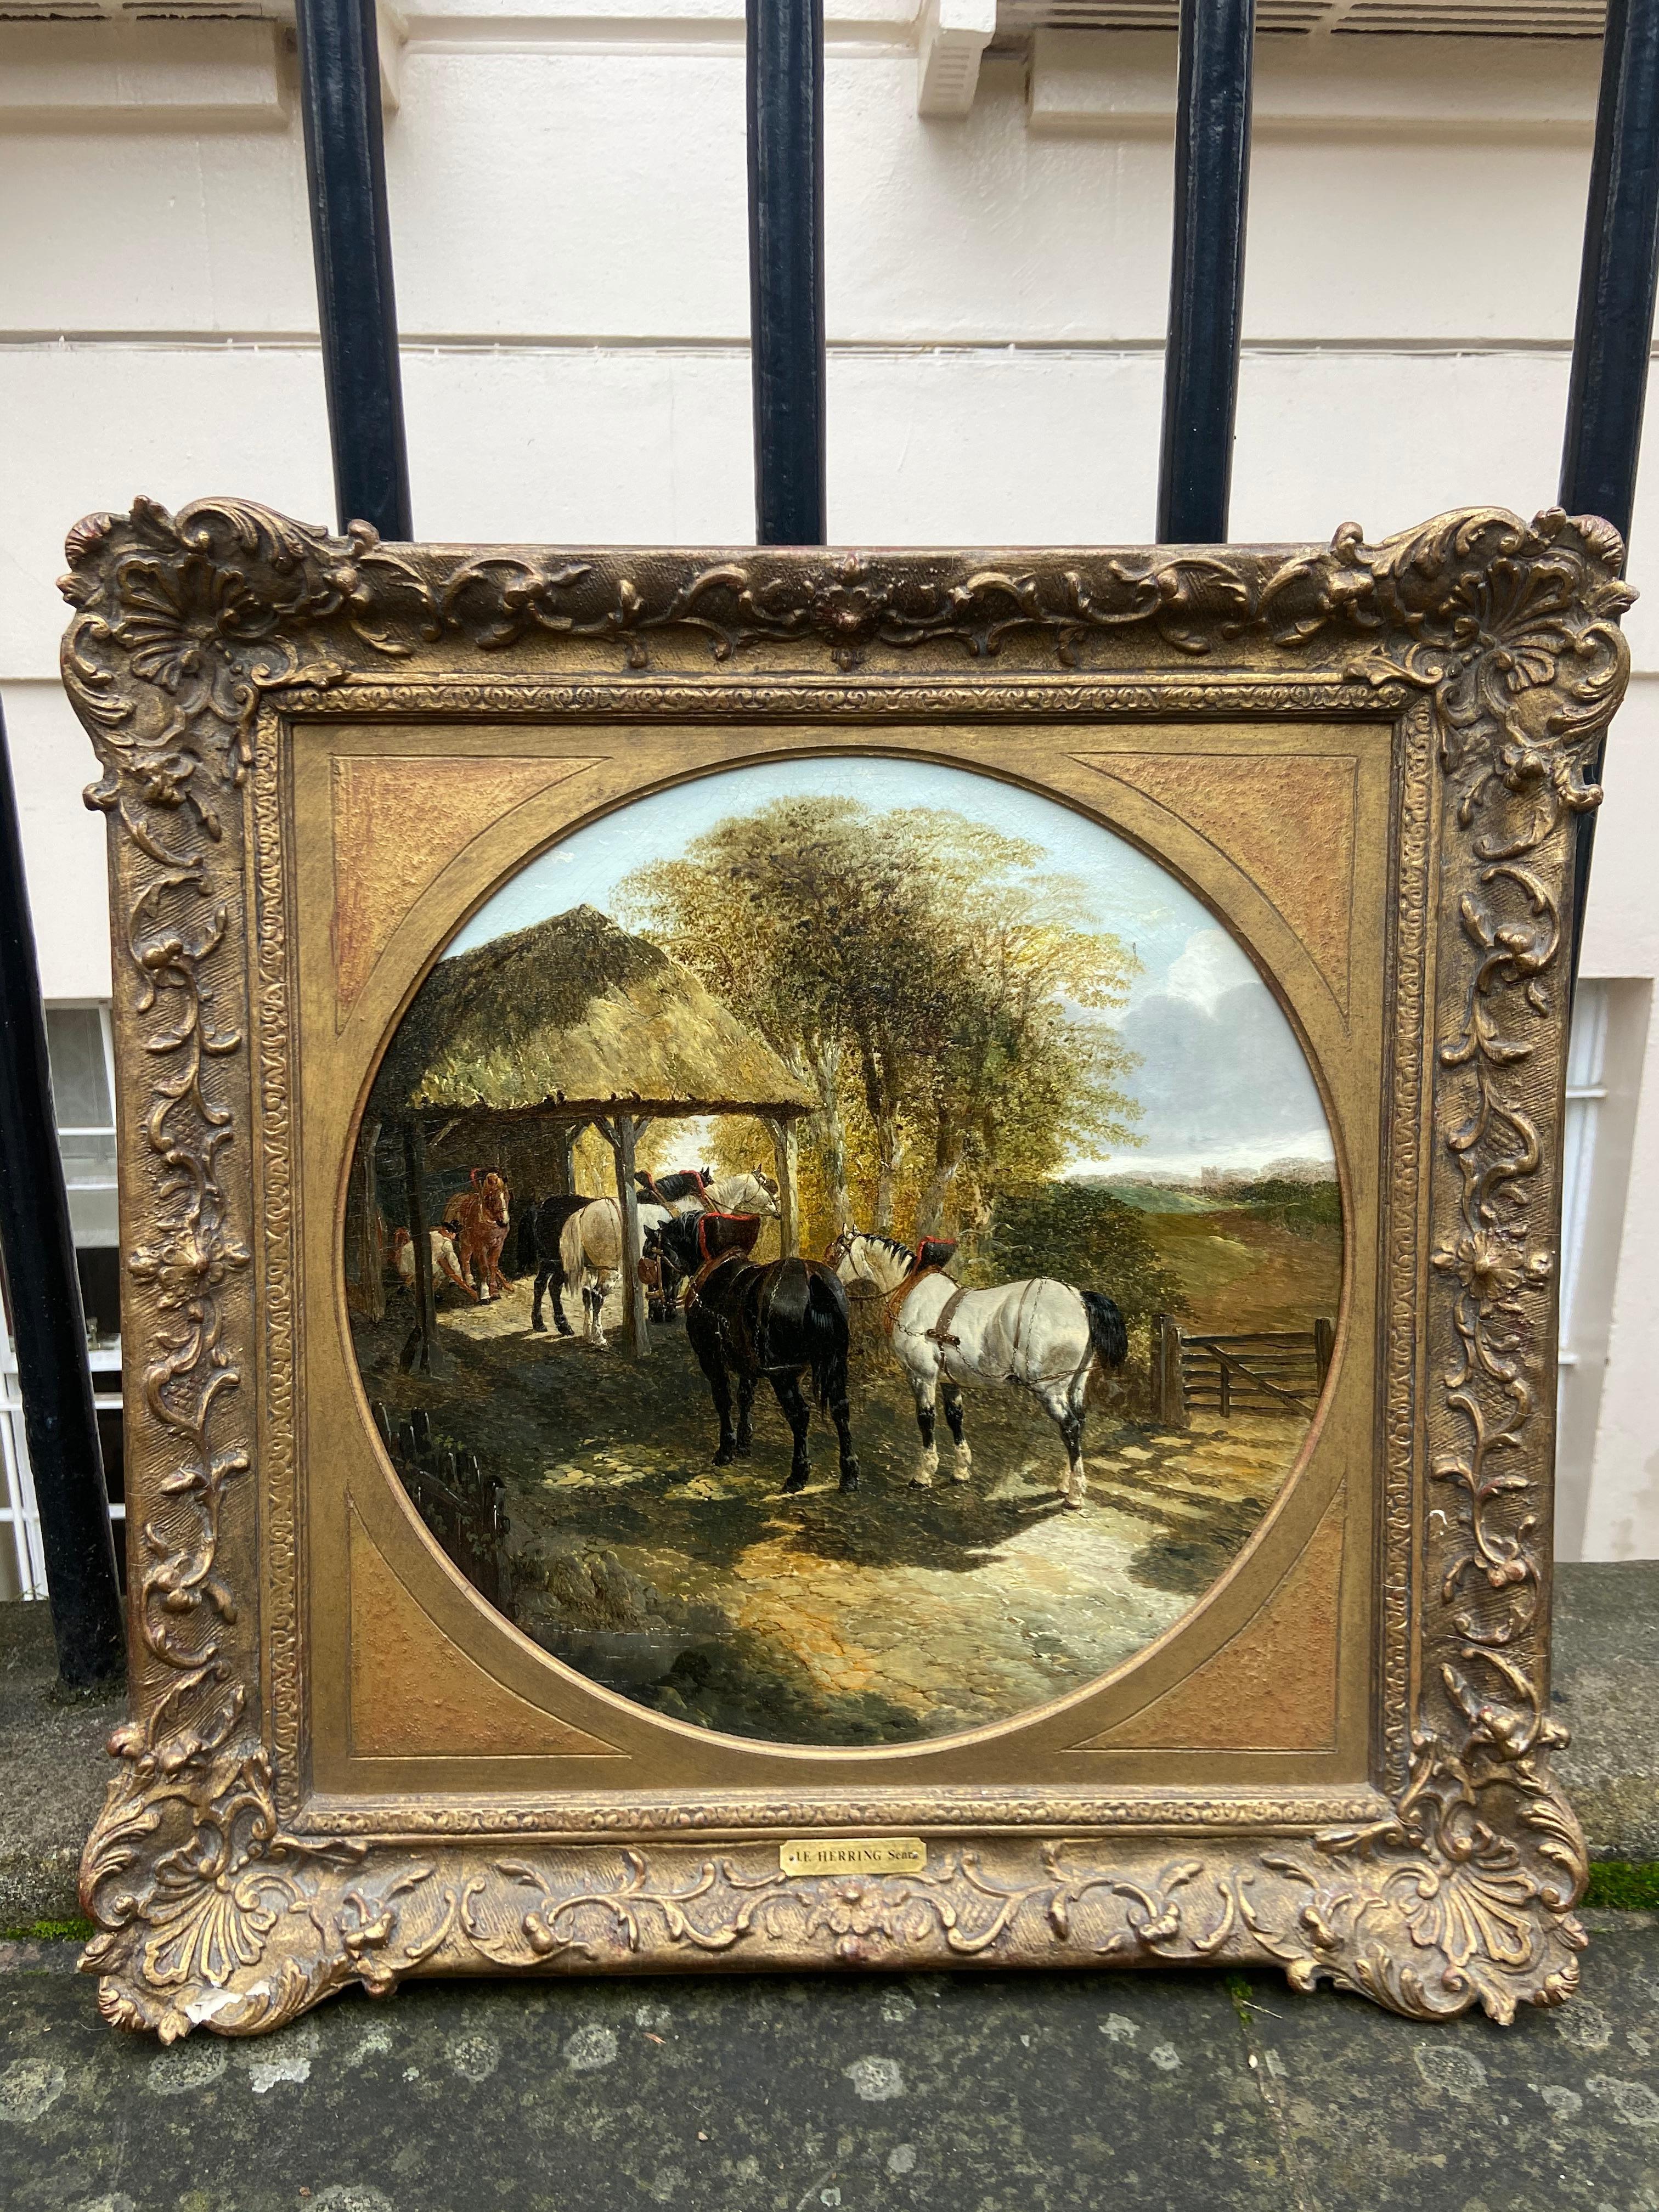 John Fredrick Herring Jr
Pair of Farmyard Scenes 
Signed and Dated 
Oil on Canvas
56 X 56 cm 

John Fredrick Herring Jr was born in Doncaster South Yorkshire around 1820. He was the son of John Fredrick Herring Sr, one of Britain's best equestrian